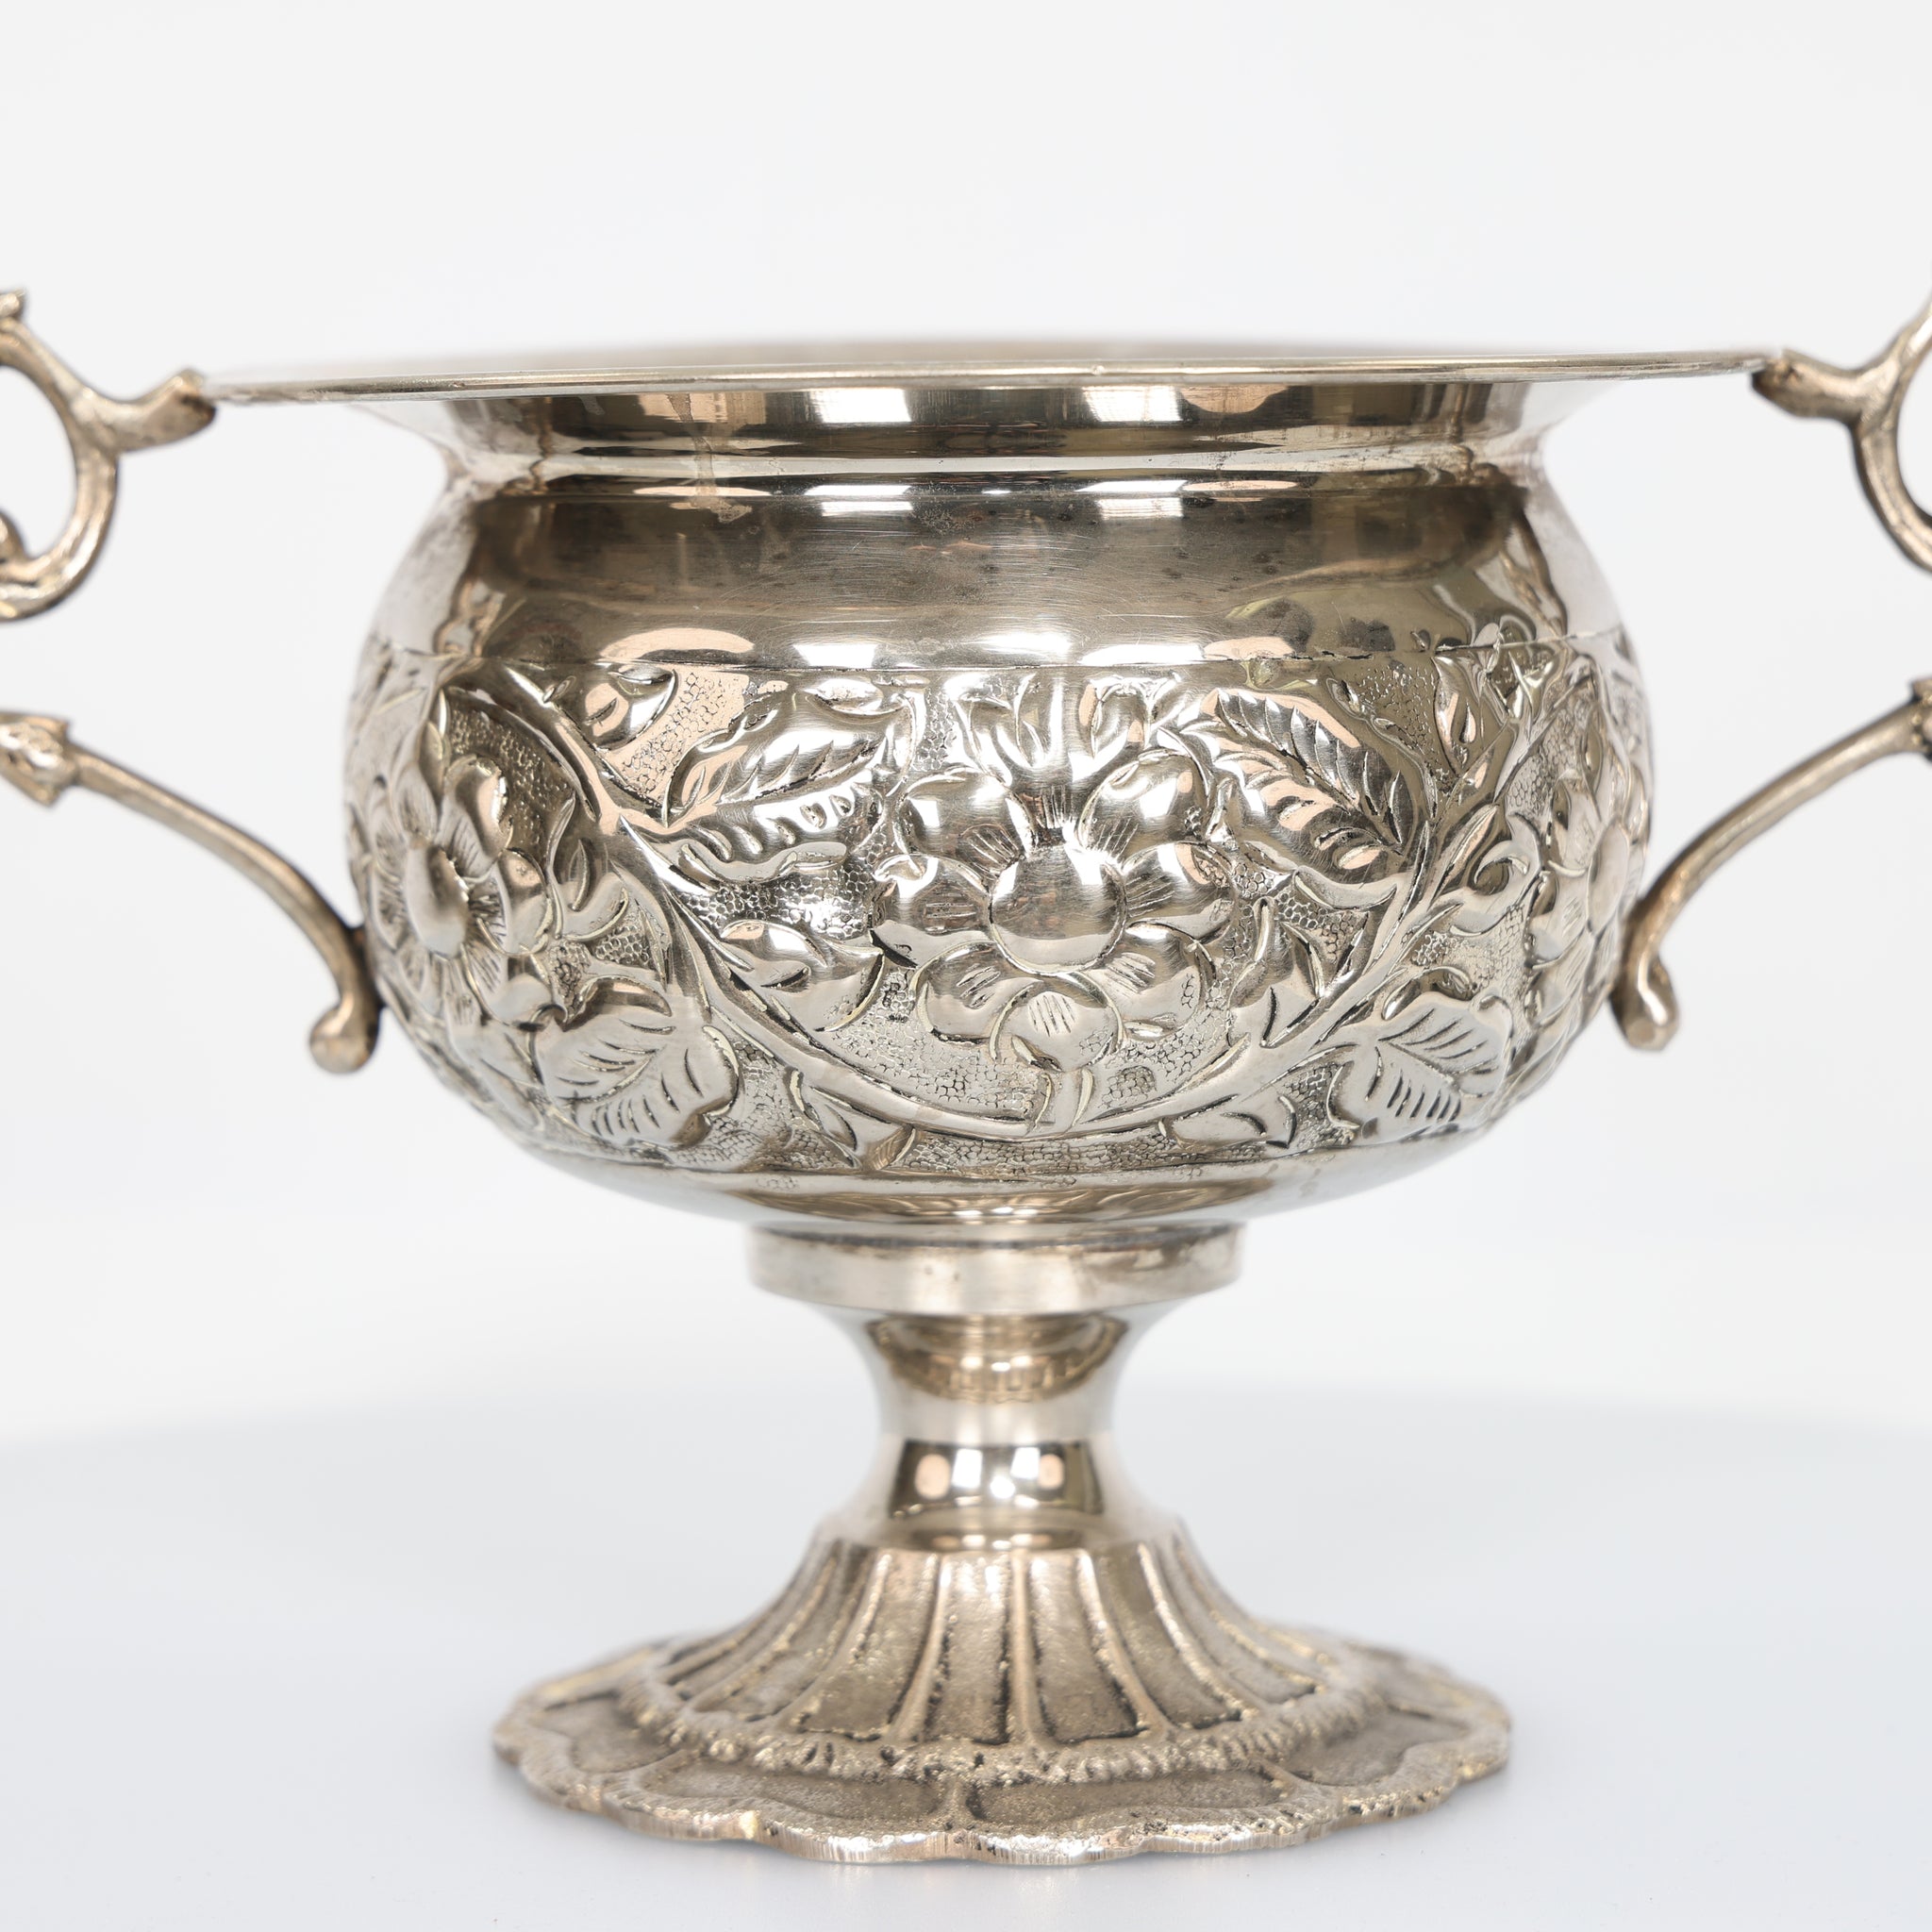 Silver Sugar Bowl with Glass Insert